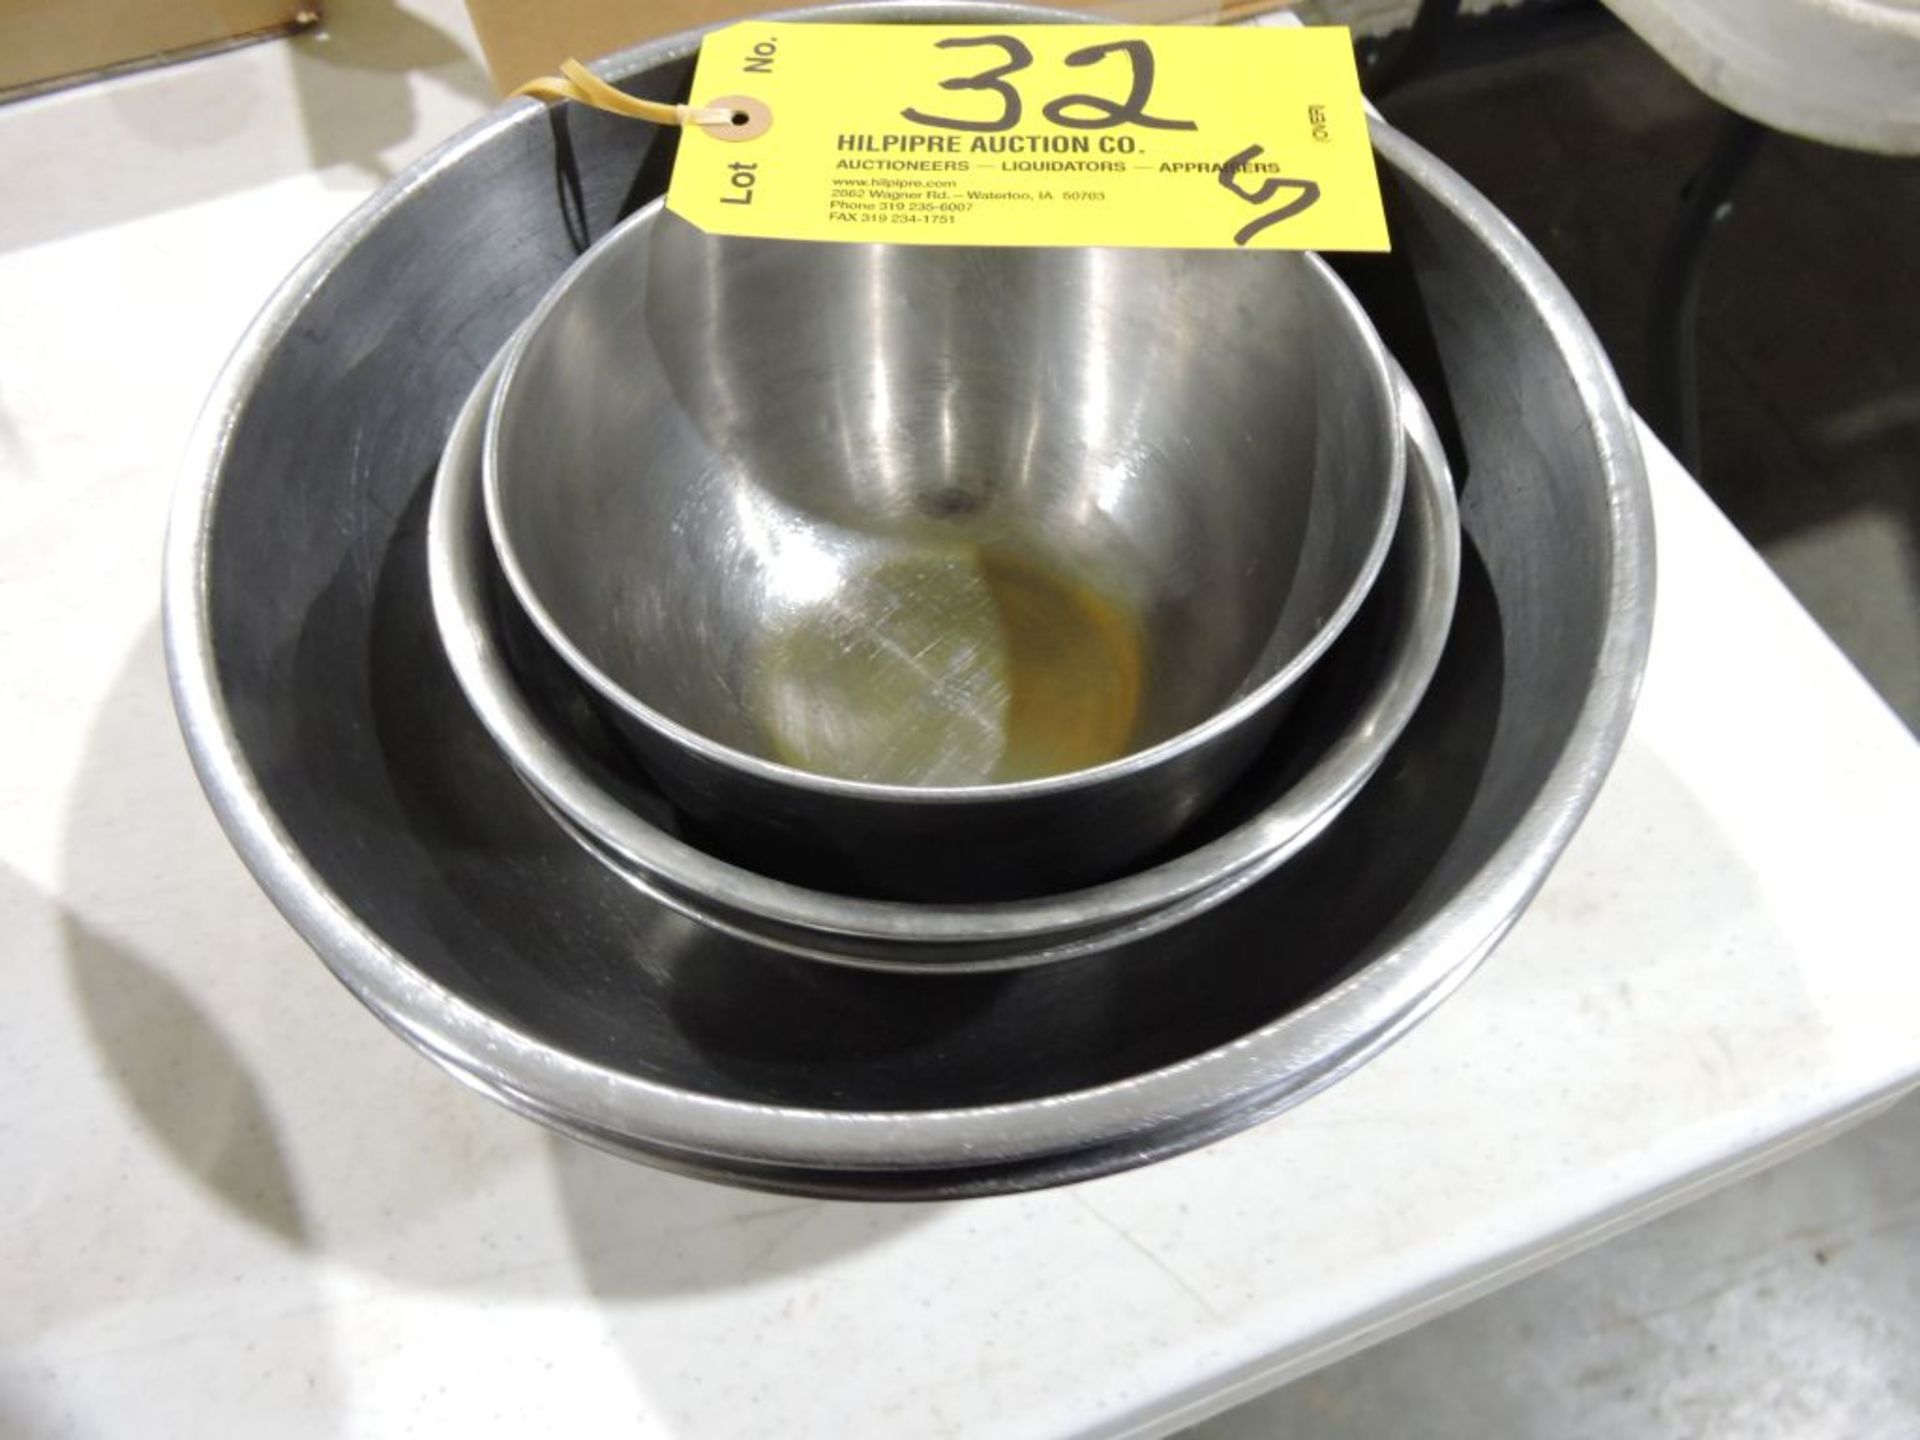 Smaller stainless steel mixing bowls.